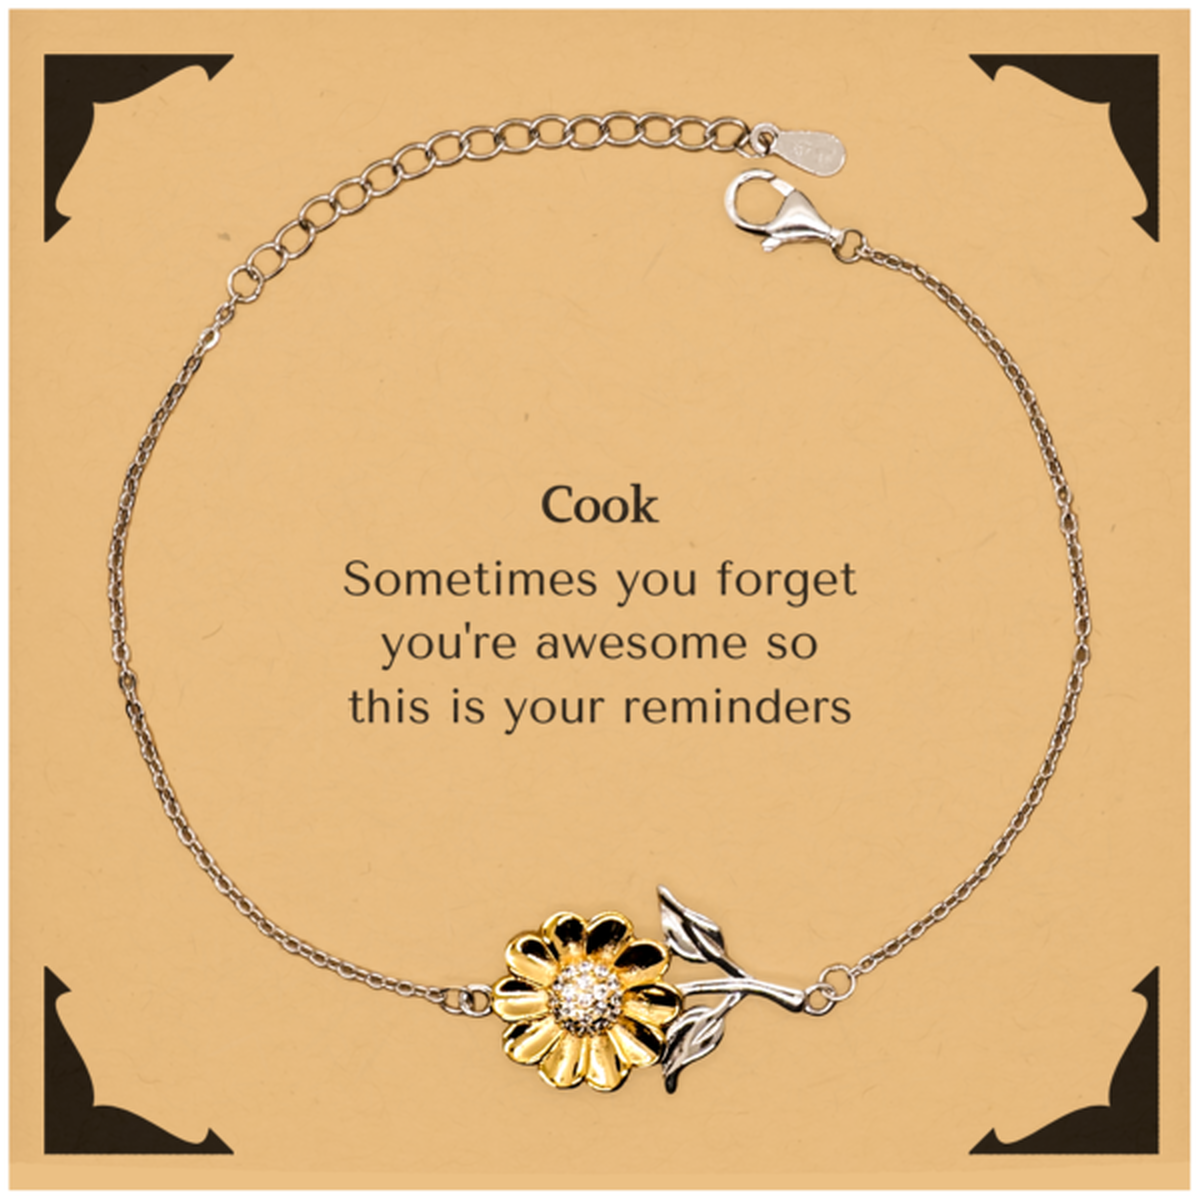 Sentimental Cook Sunflower Bracelet, Cook Sometimes you forget you're awesome so this is your reminders, Graduation Christmas Birthday Gifts for Cook, Men, Women, Coworkers